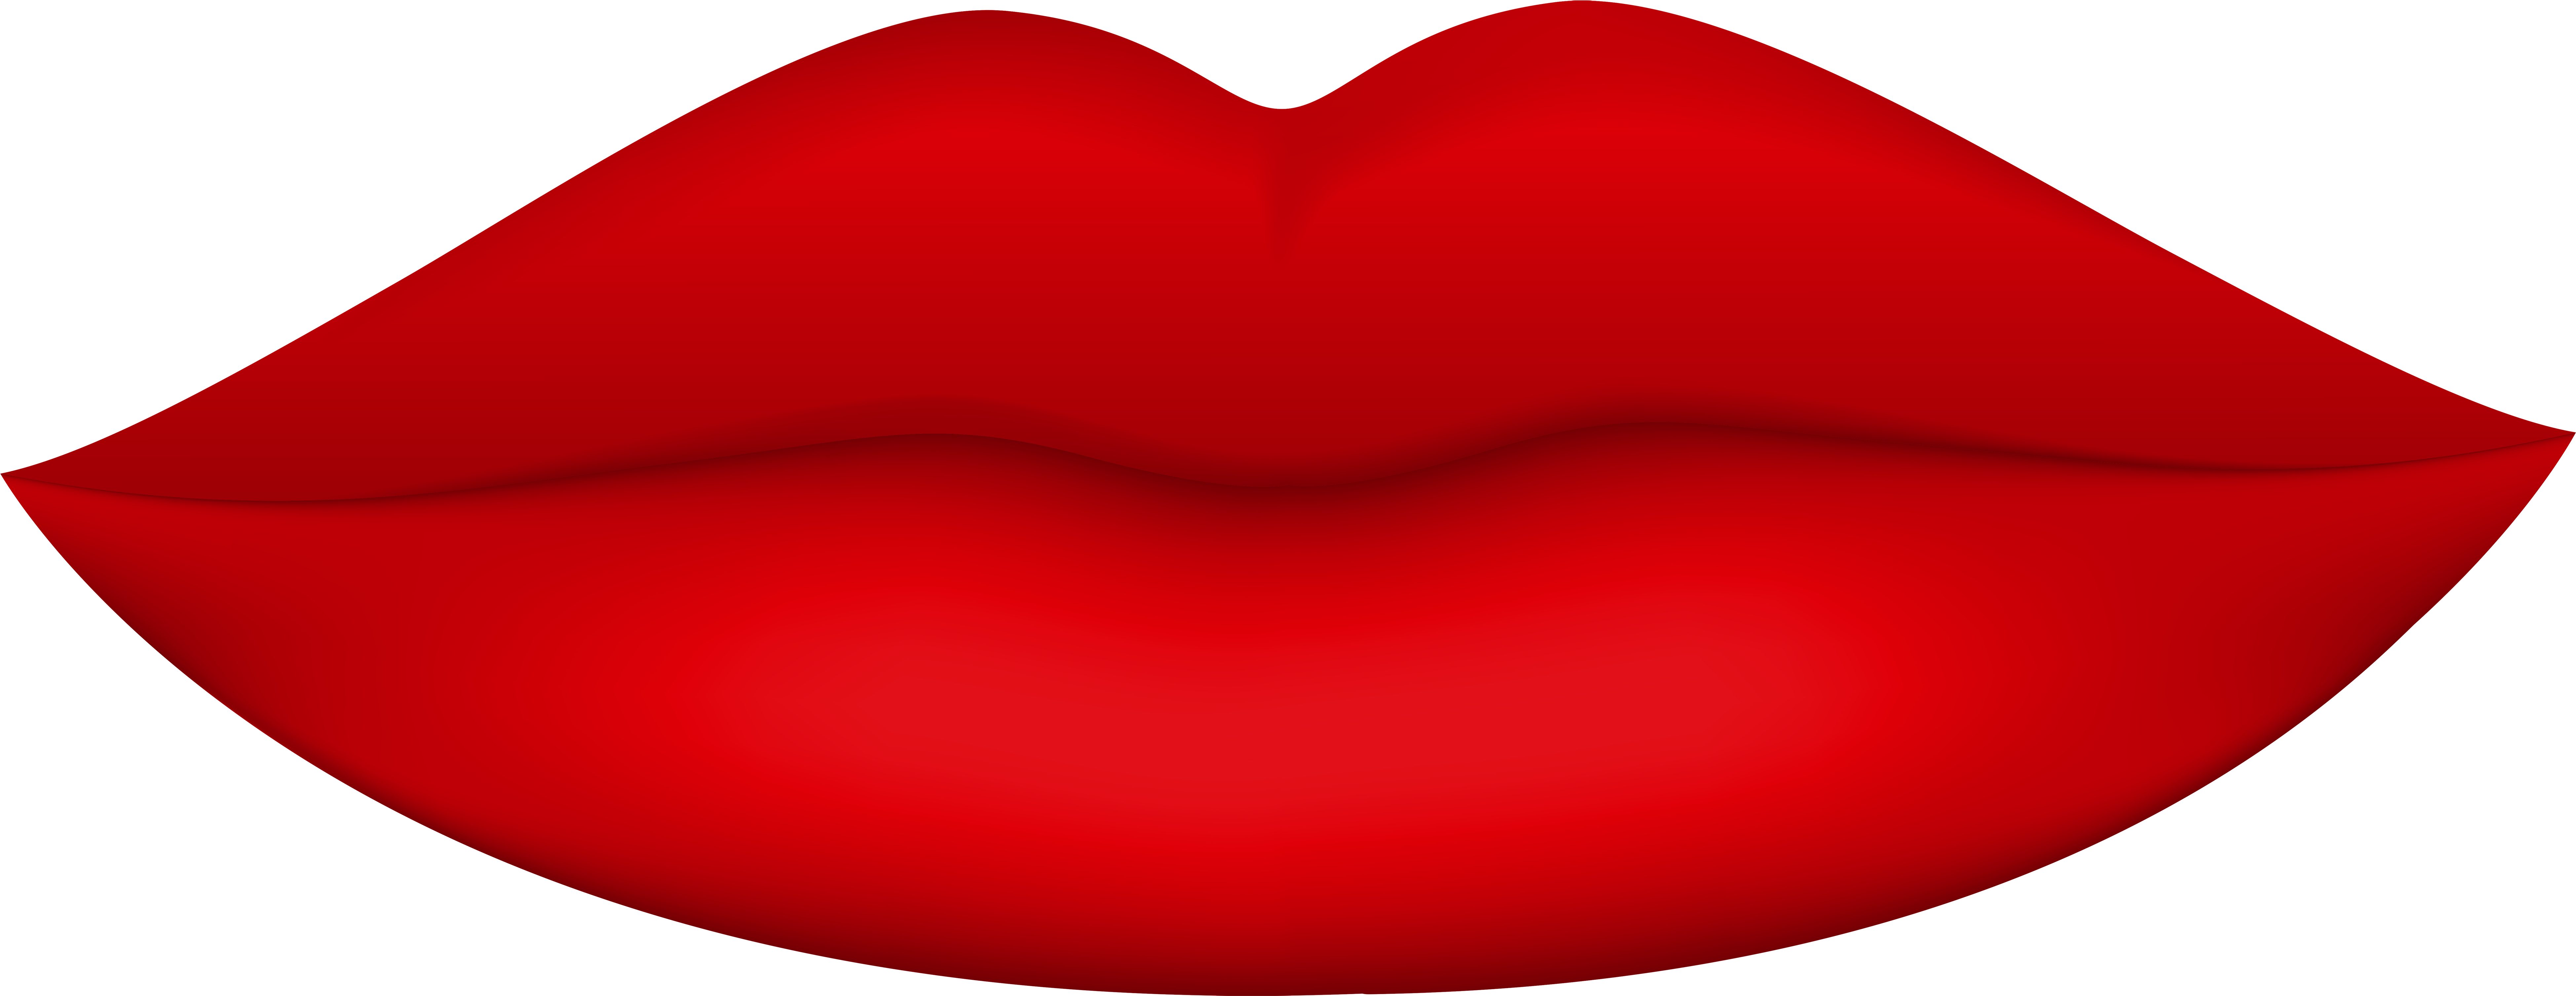 Clipart Of Lips Red Png Clip Art Best Web - Clipart Of Lips Red Png Clip Art Best Web (8000x3090)